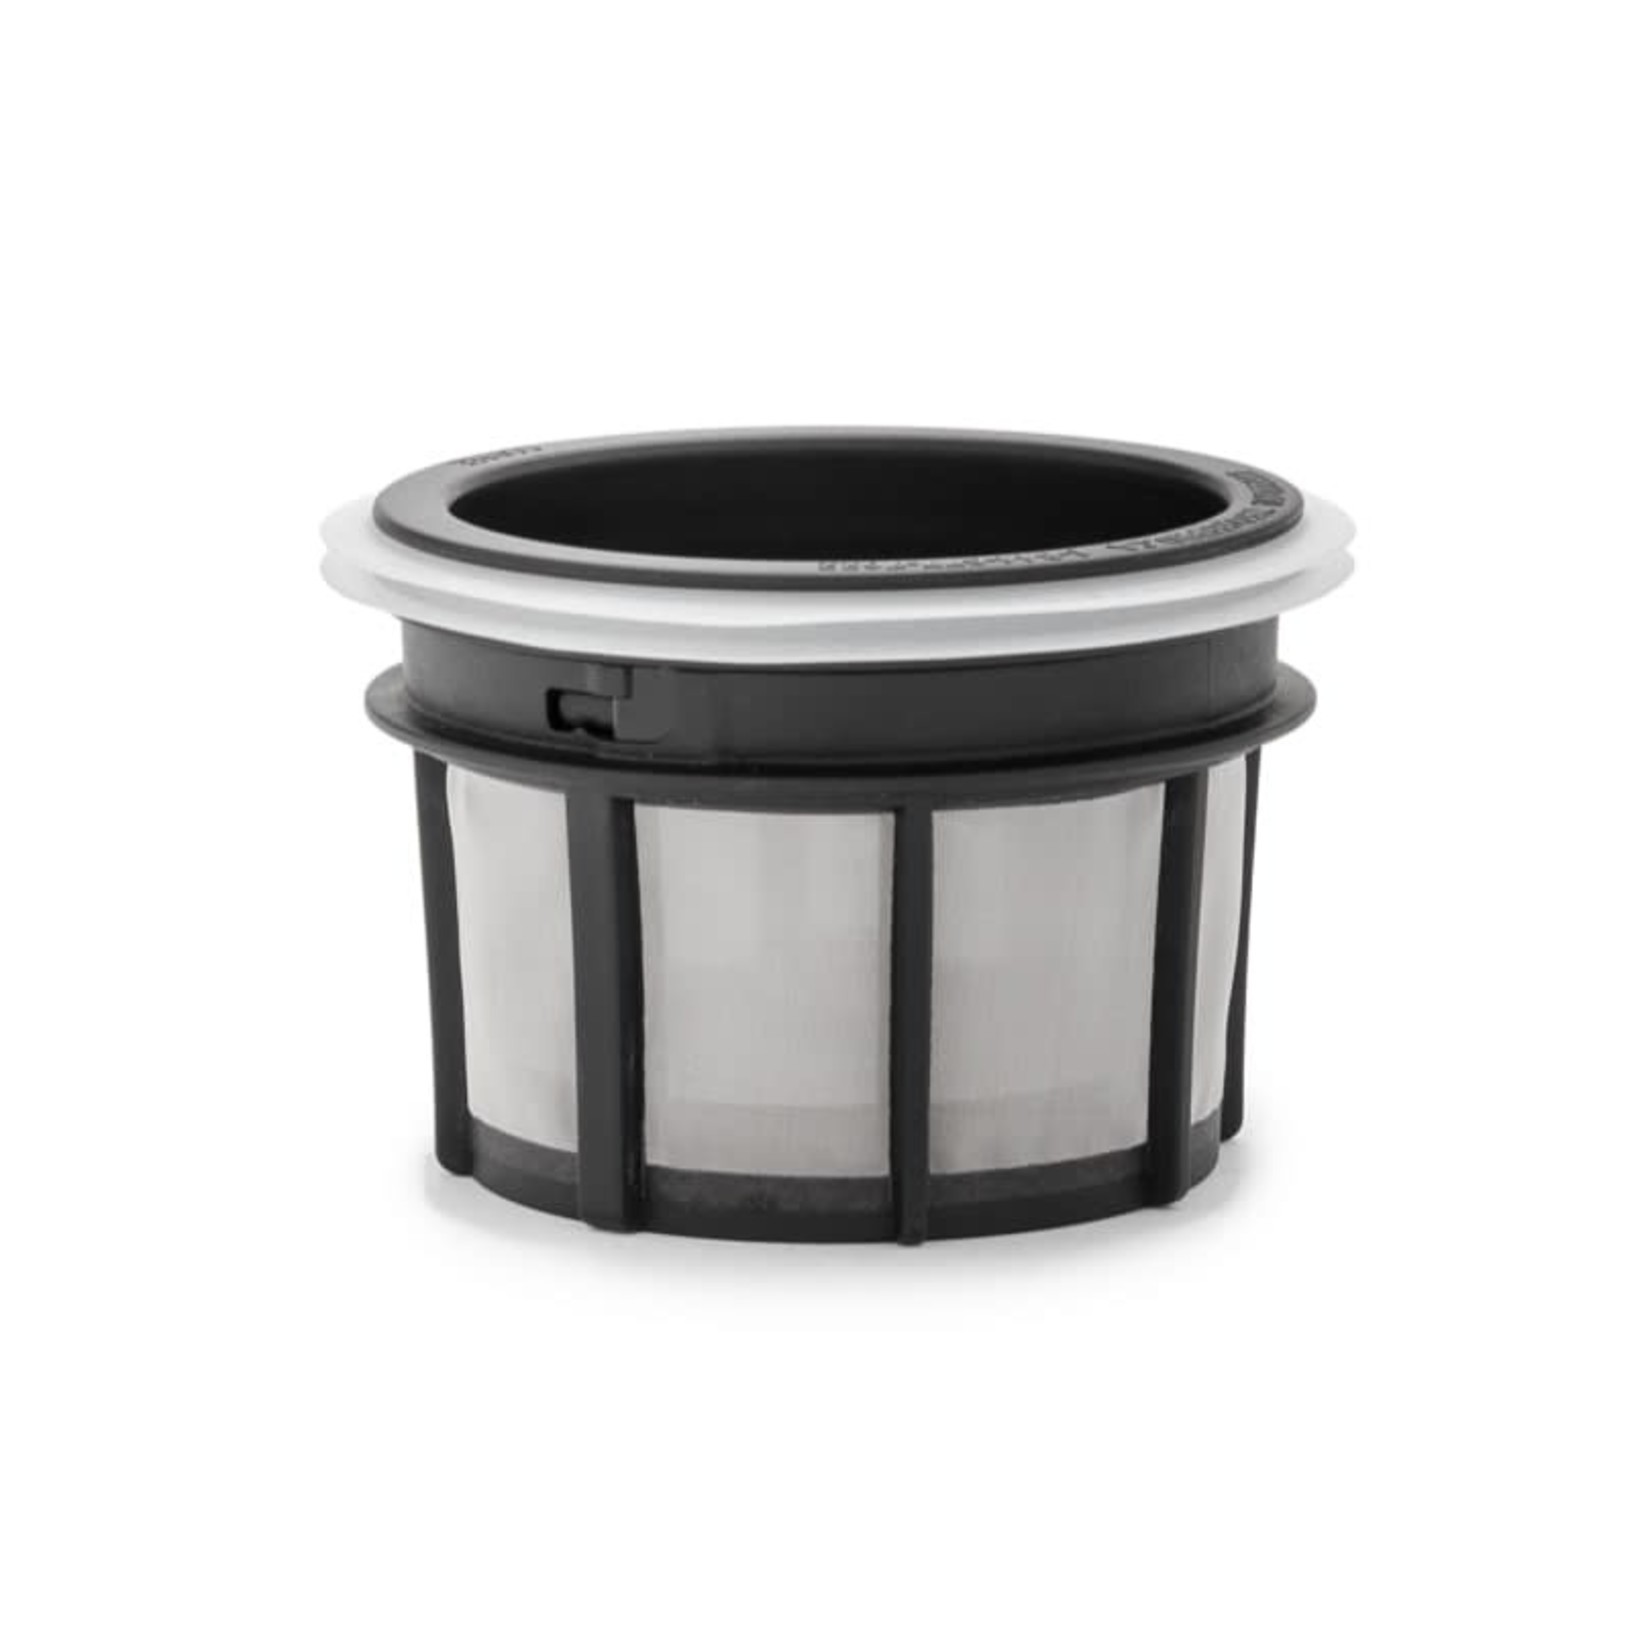 ESPRO ESPRO Large French Press Filter DISC